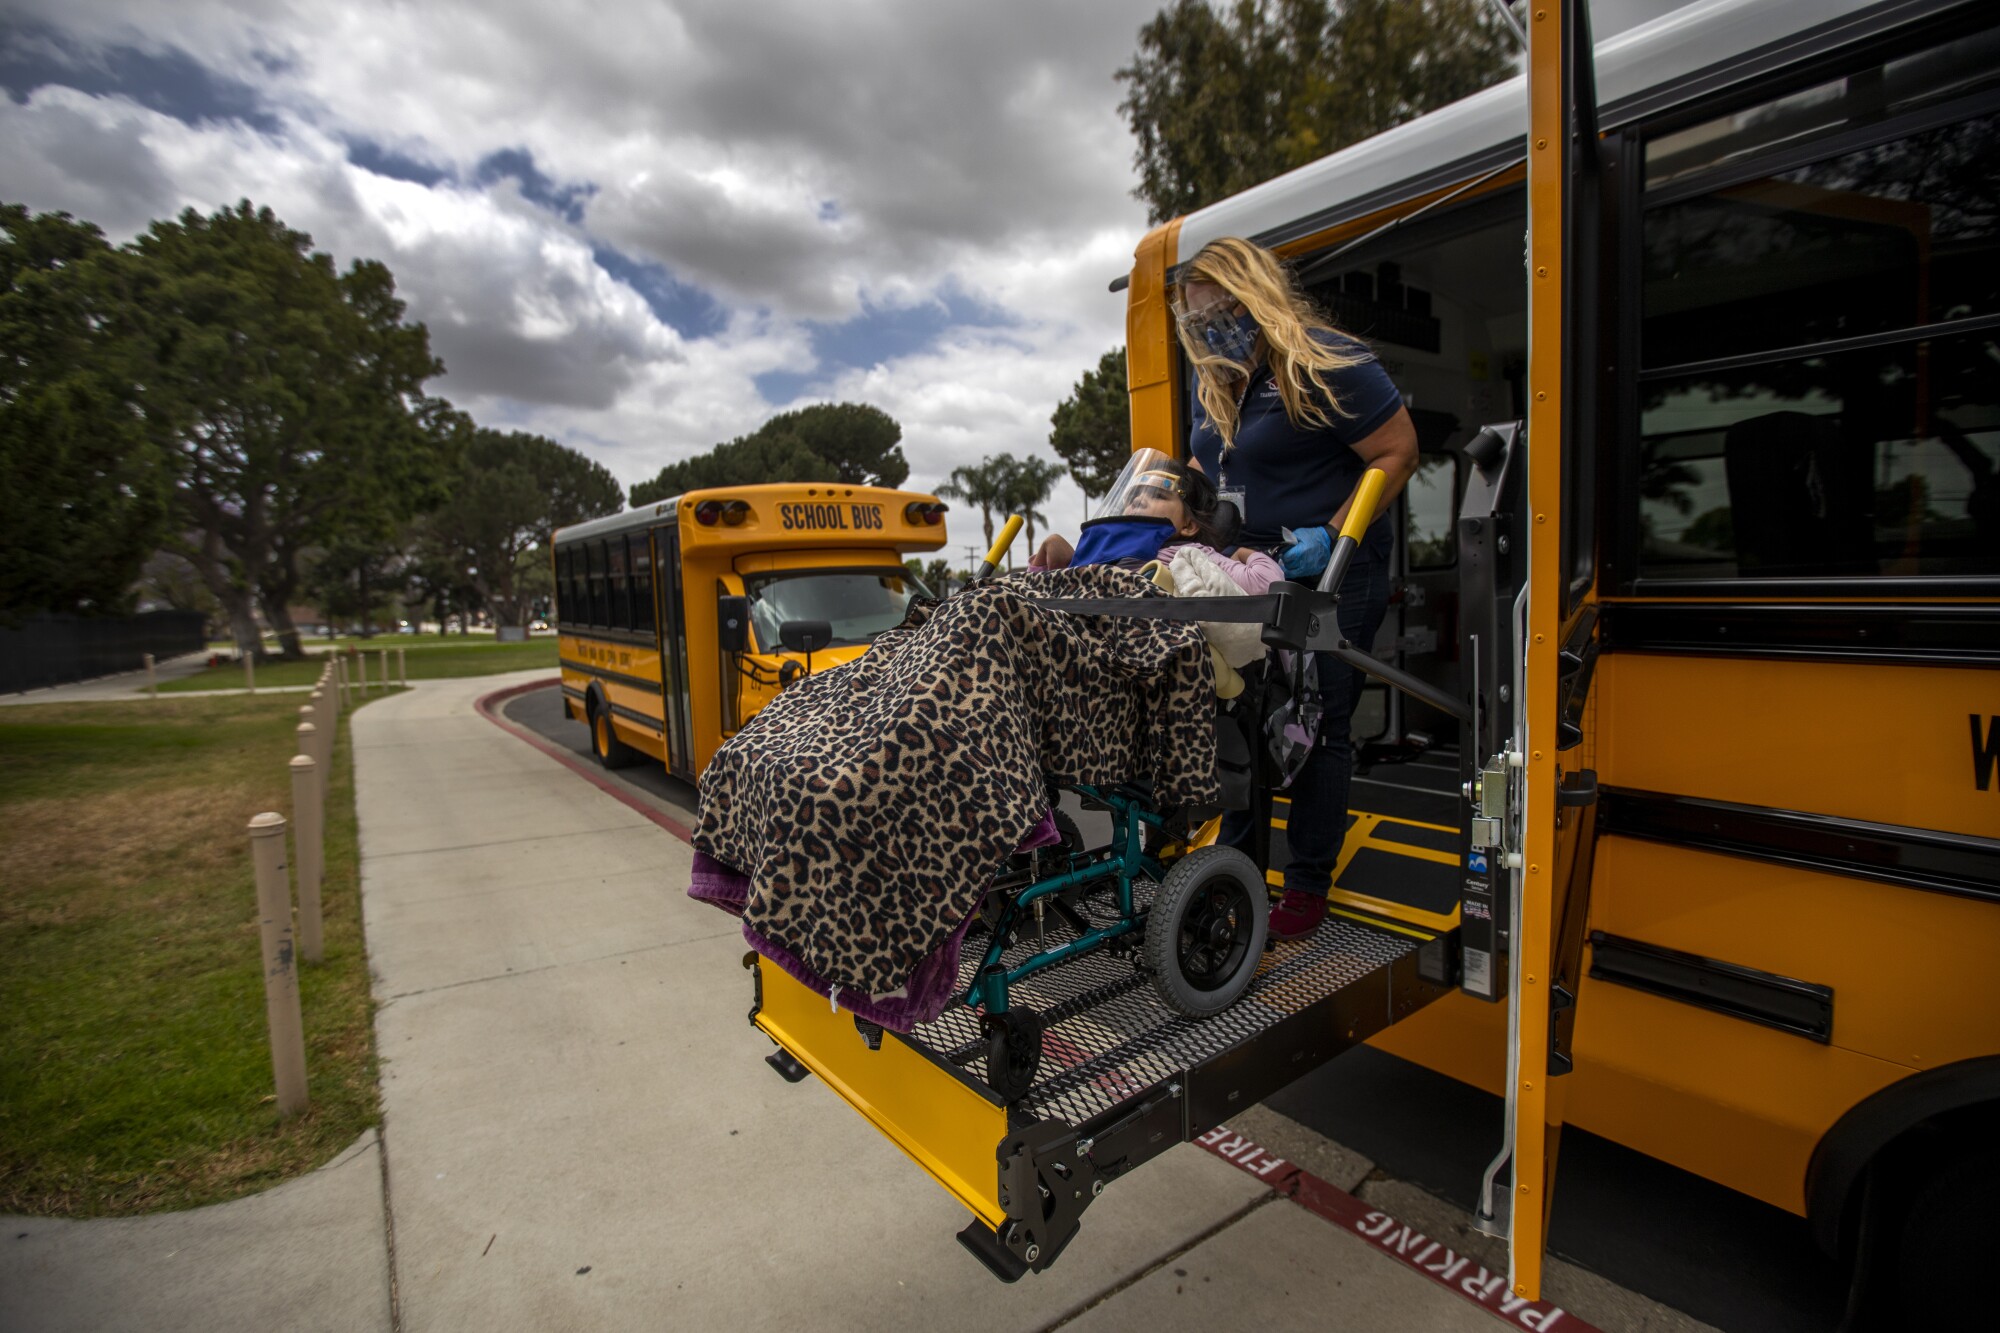 Hannah Lopez, 18, arrives by bus at California High School in Whittier.